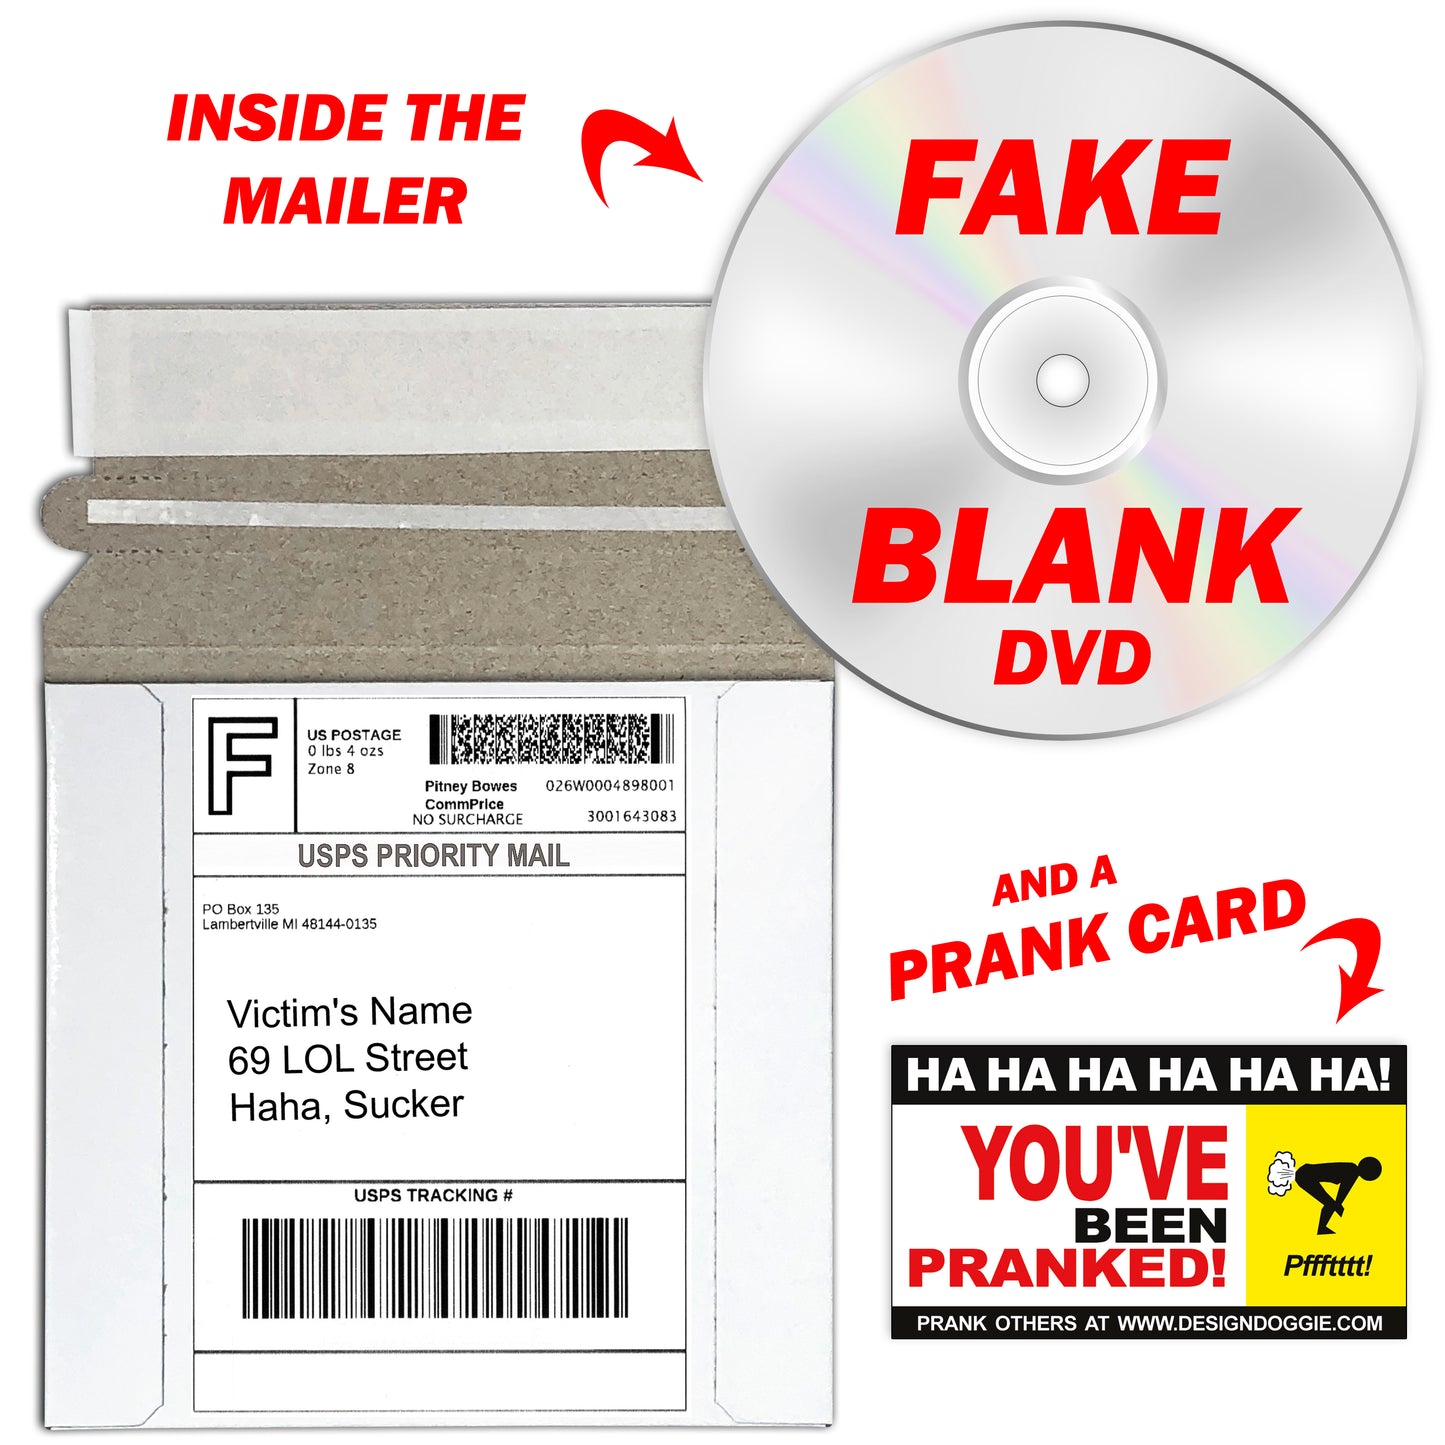 The Strangest Things People Put in their Rear Fake DVD mail prank gets sent directly to your victims 100% anonymously!